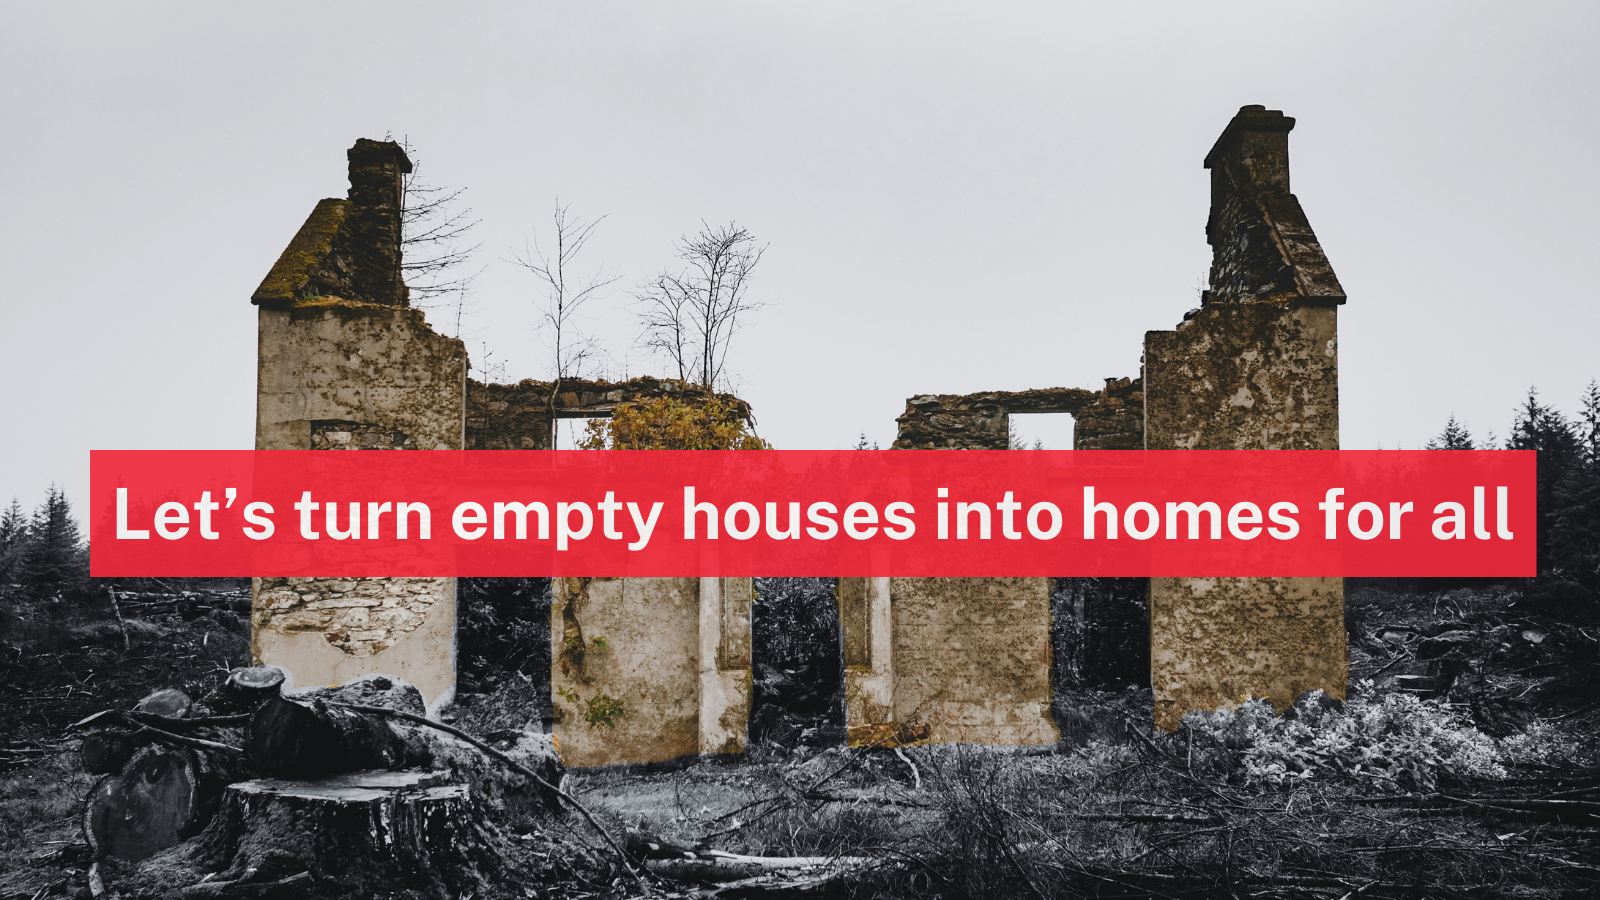 Turn empty houses into homes for all